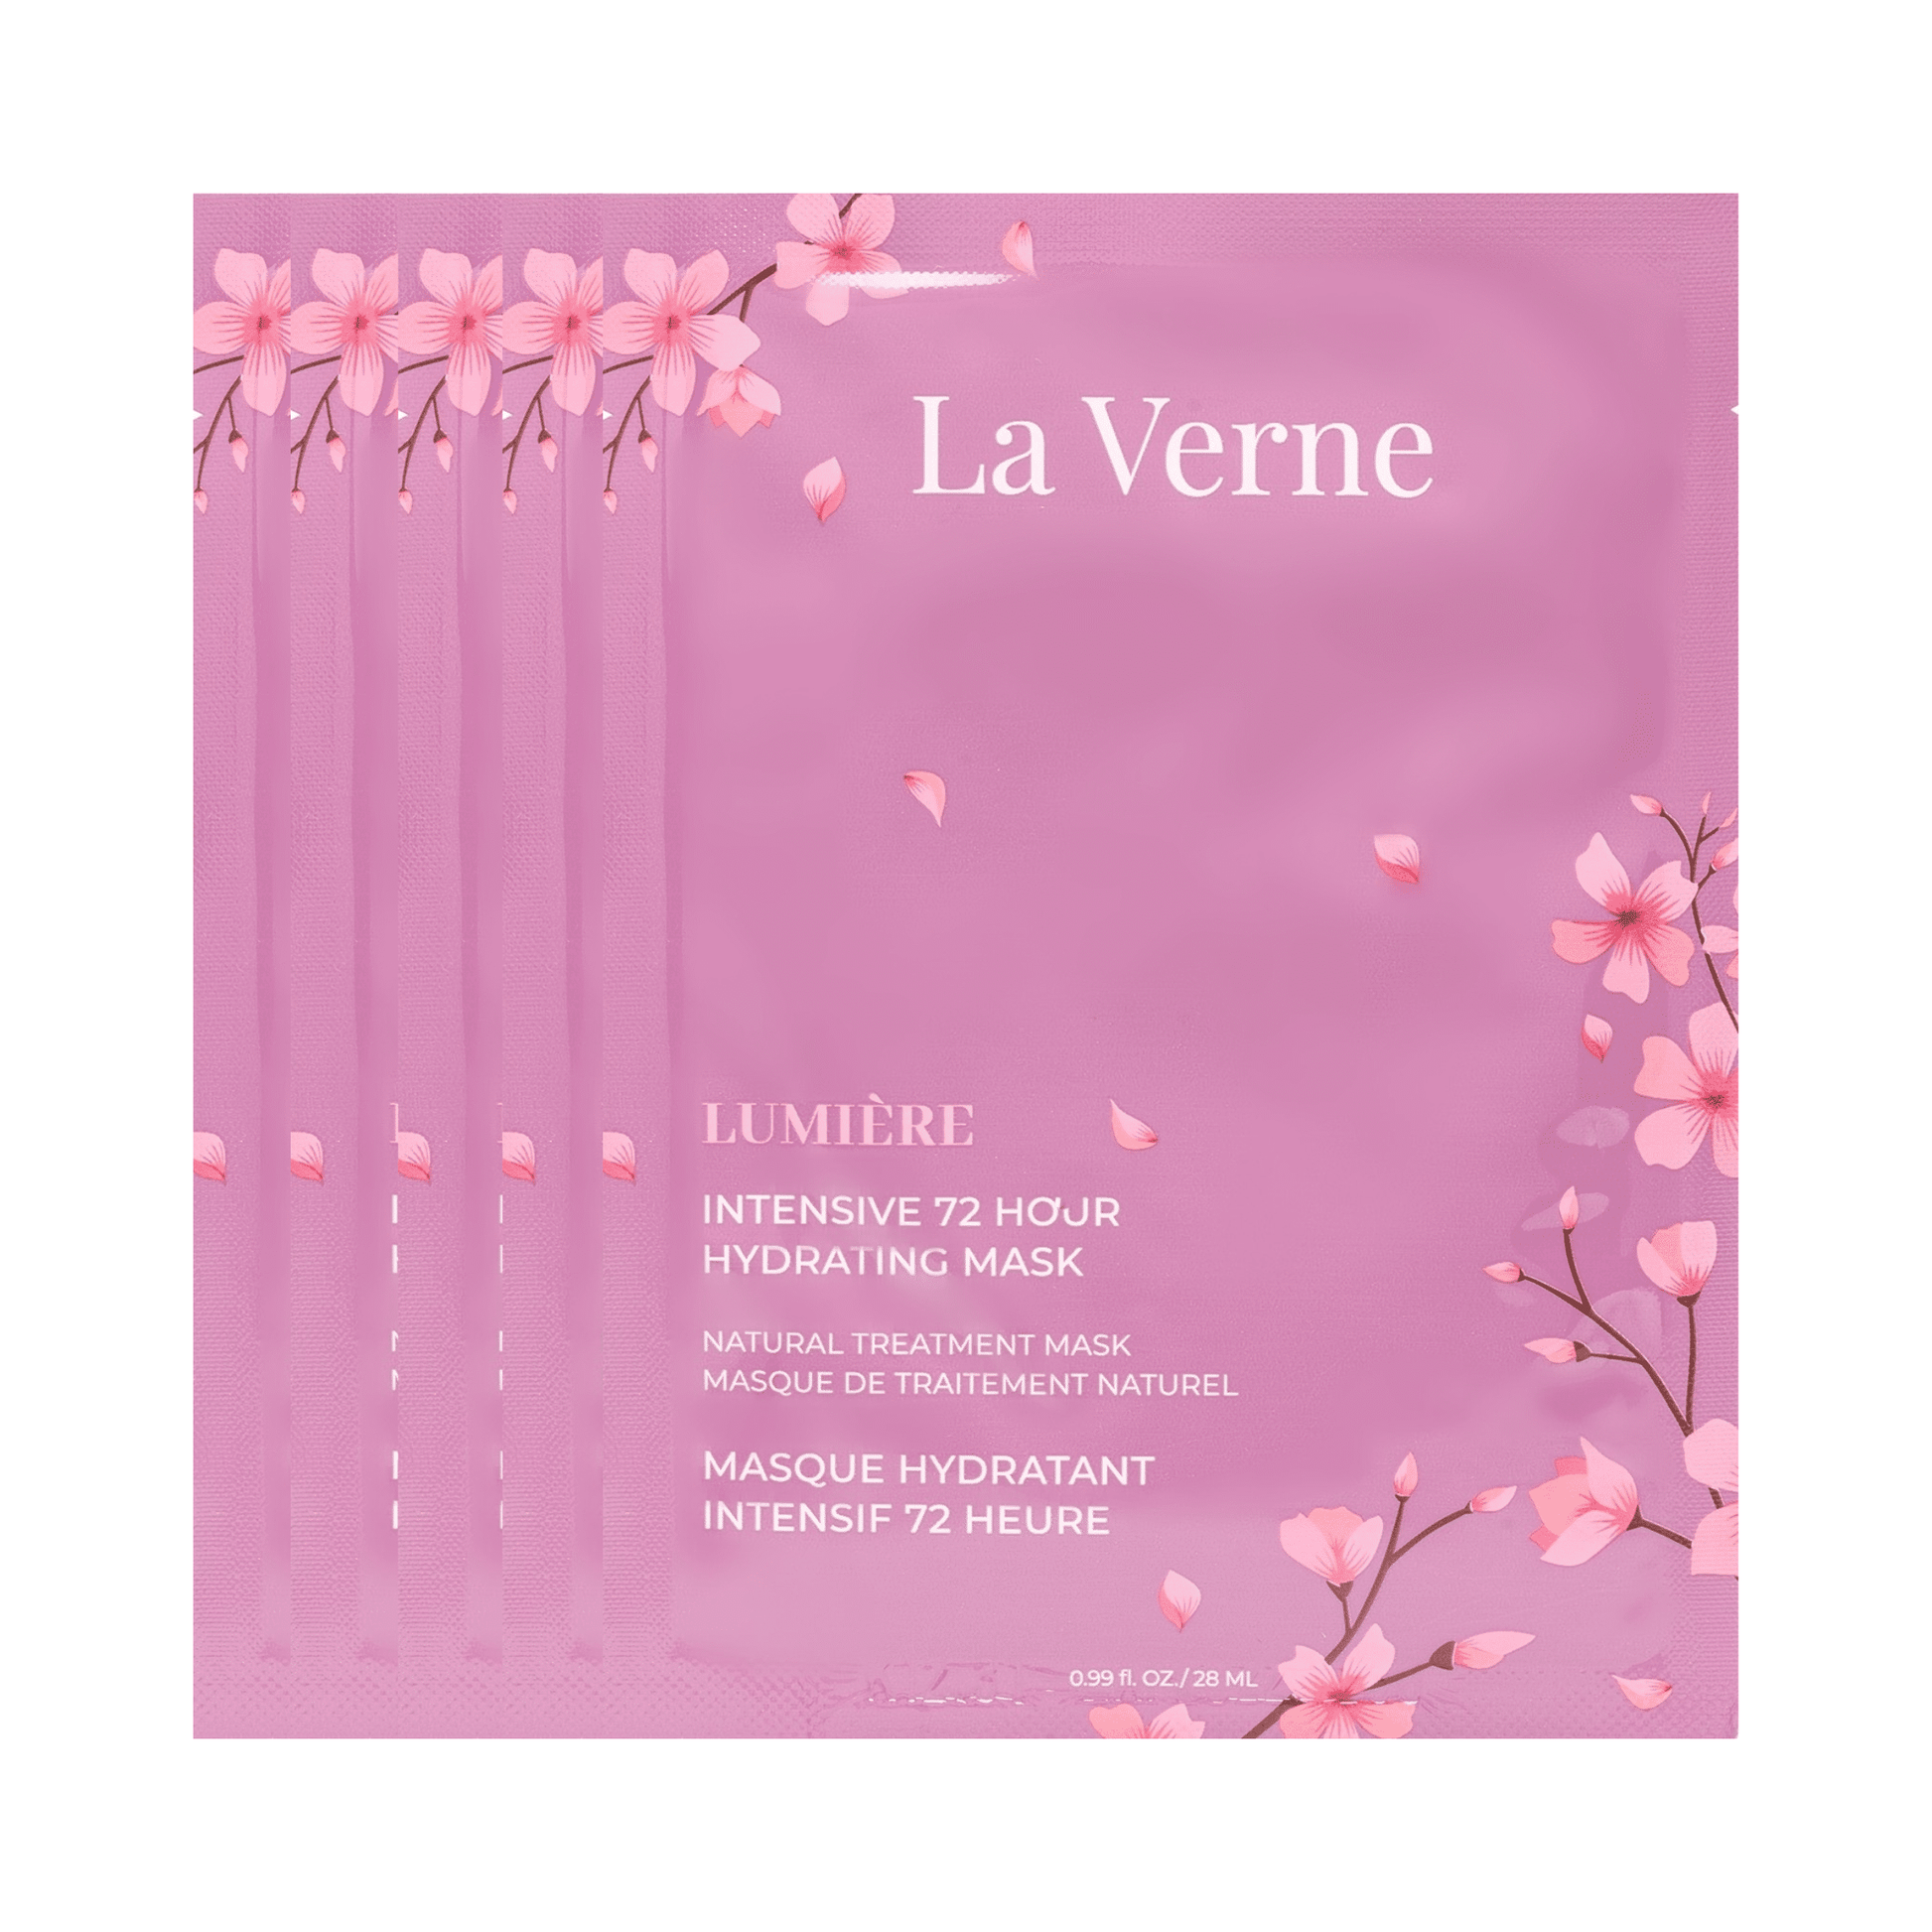 La Verne Lumiere Intensive 72 Hour Hydrating Mask MiessentialStore